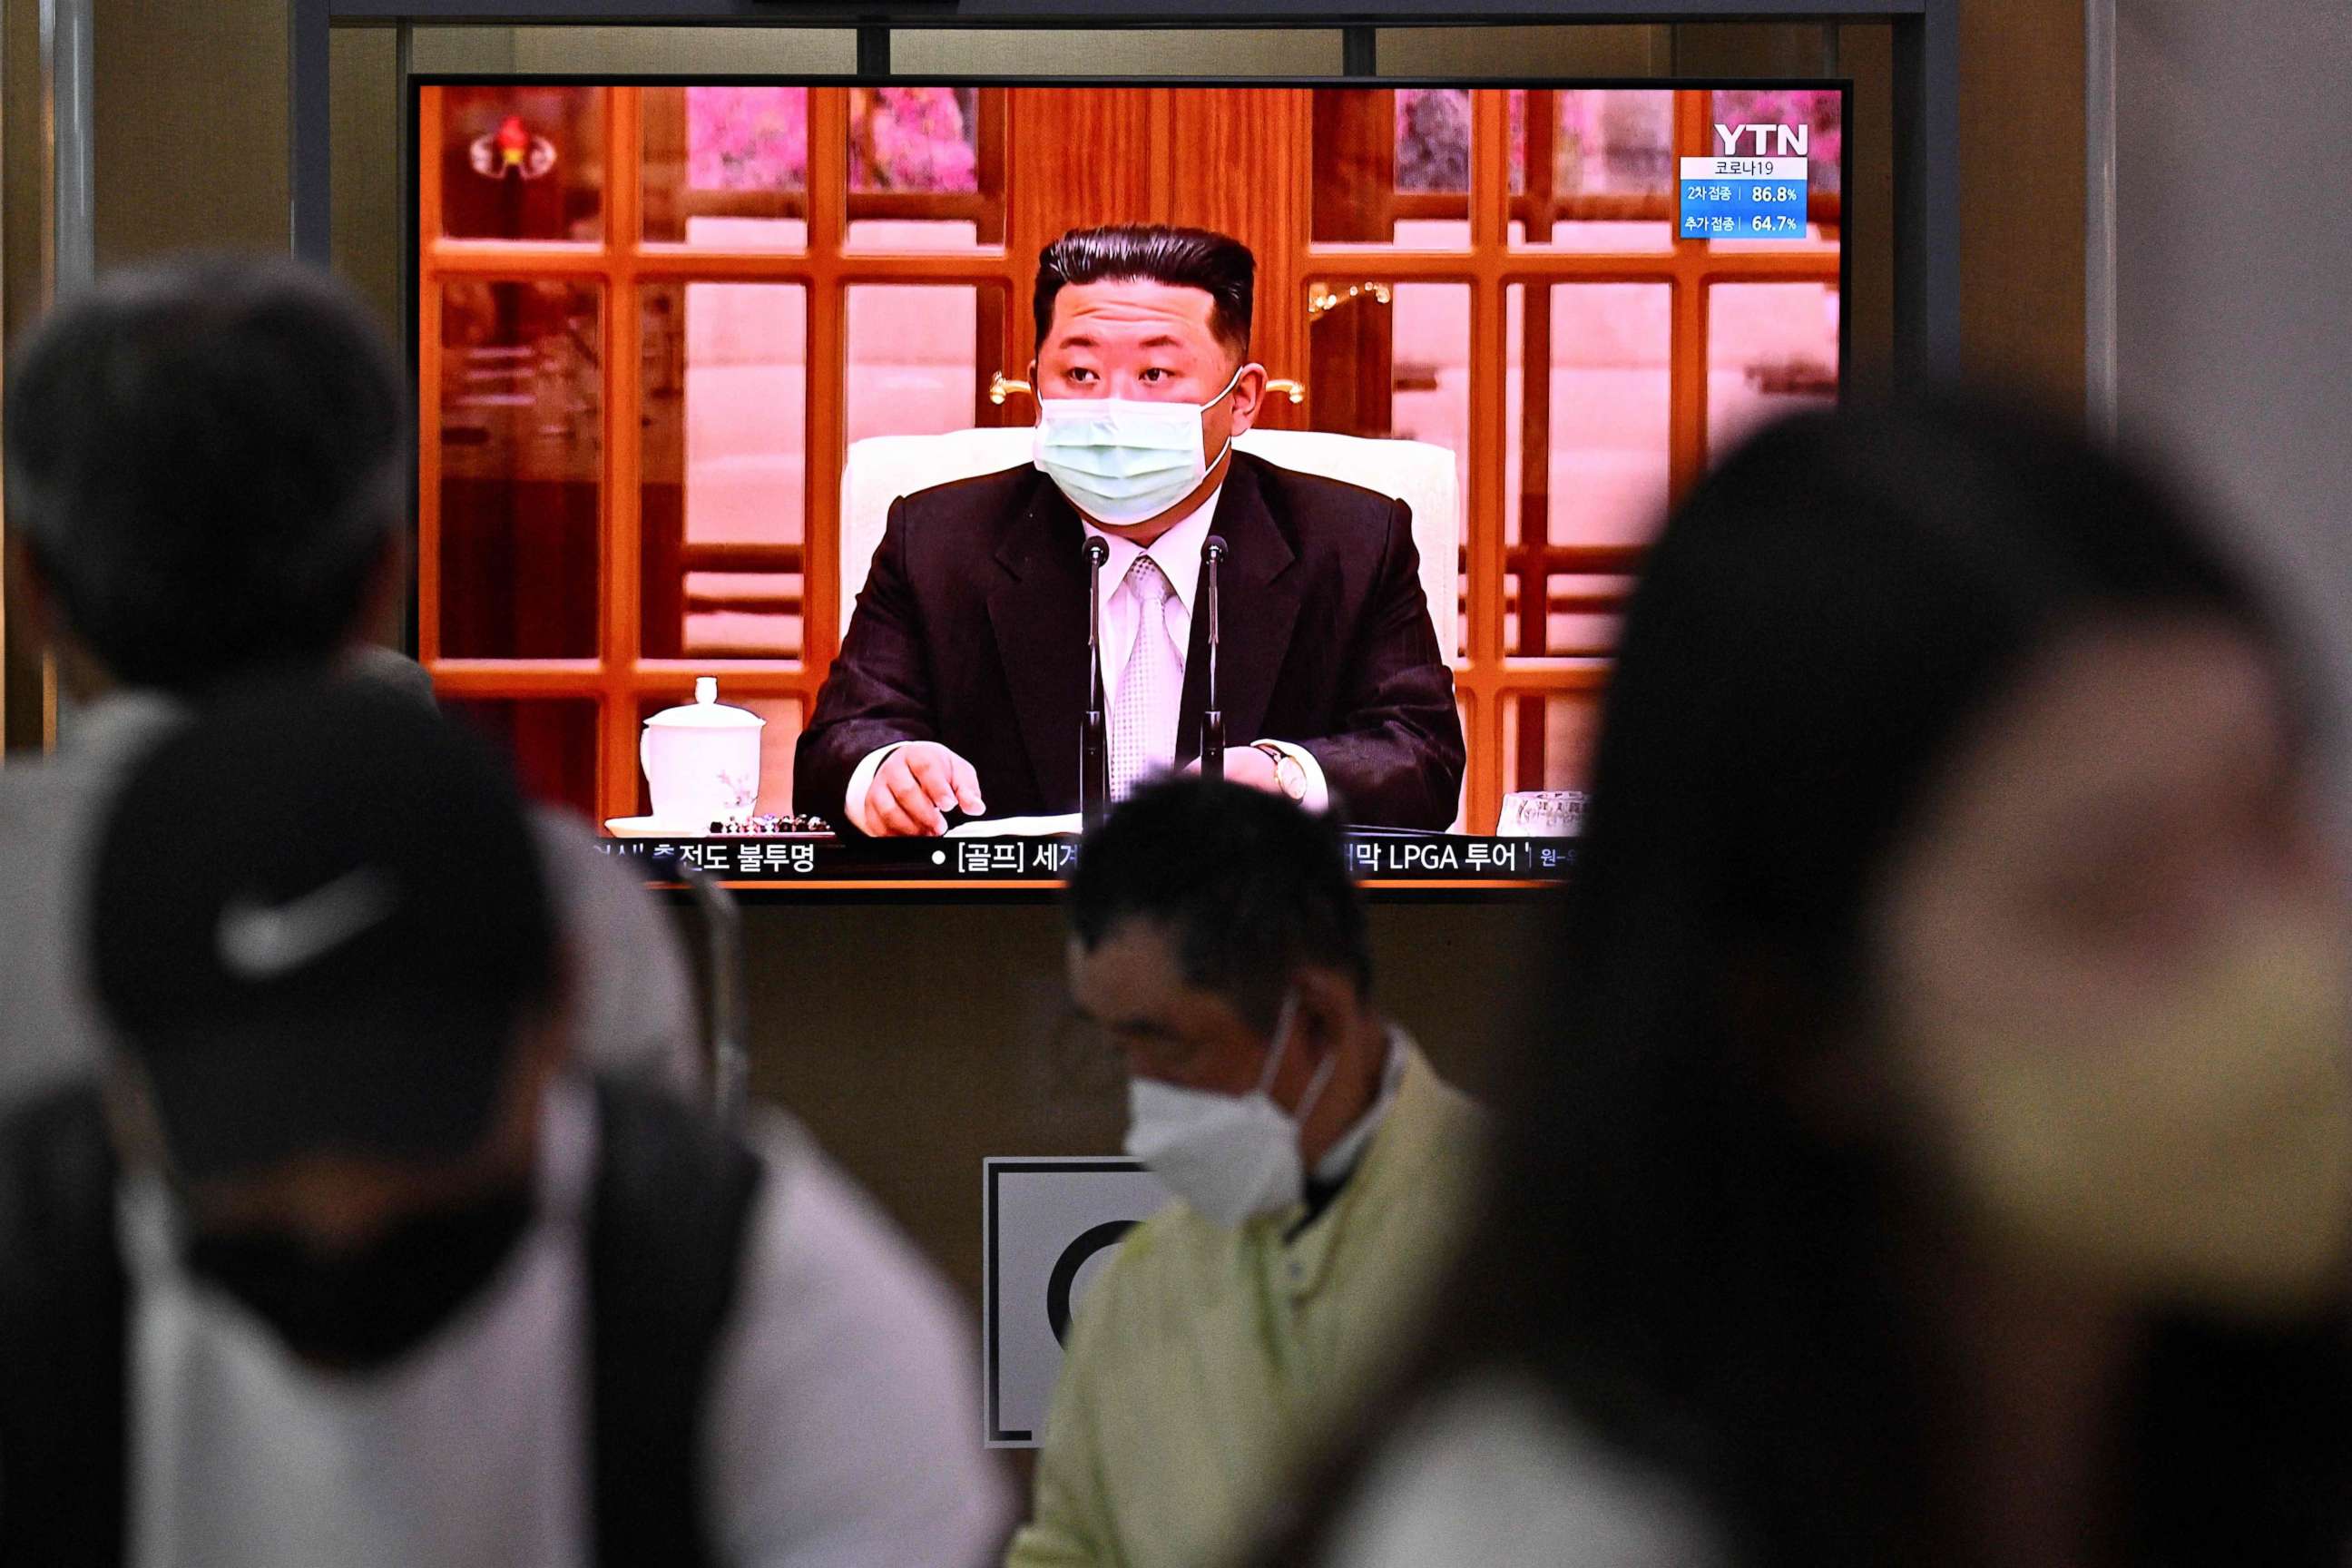 PHOTO: People sit near a screen showing a news broadcast at a train station in Seoul on May 12, 2022